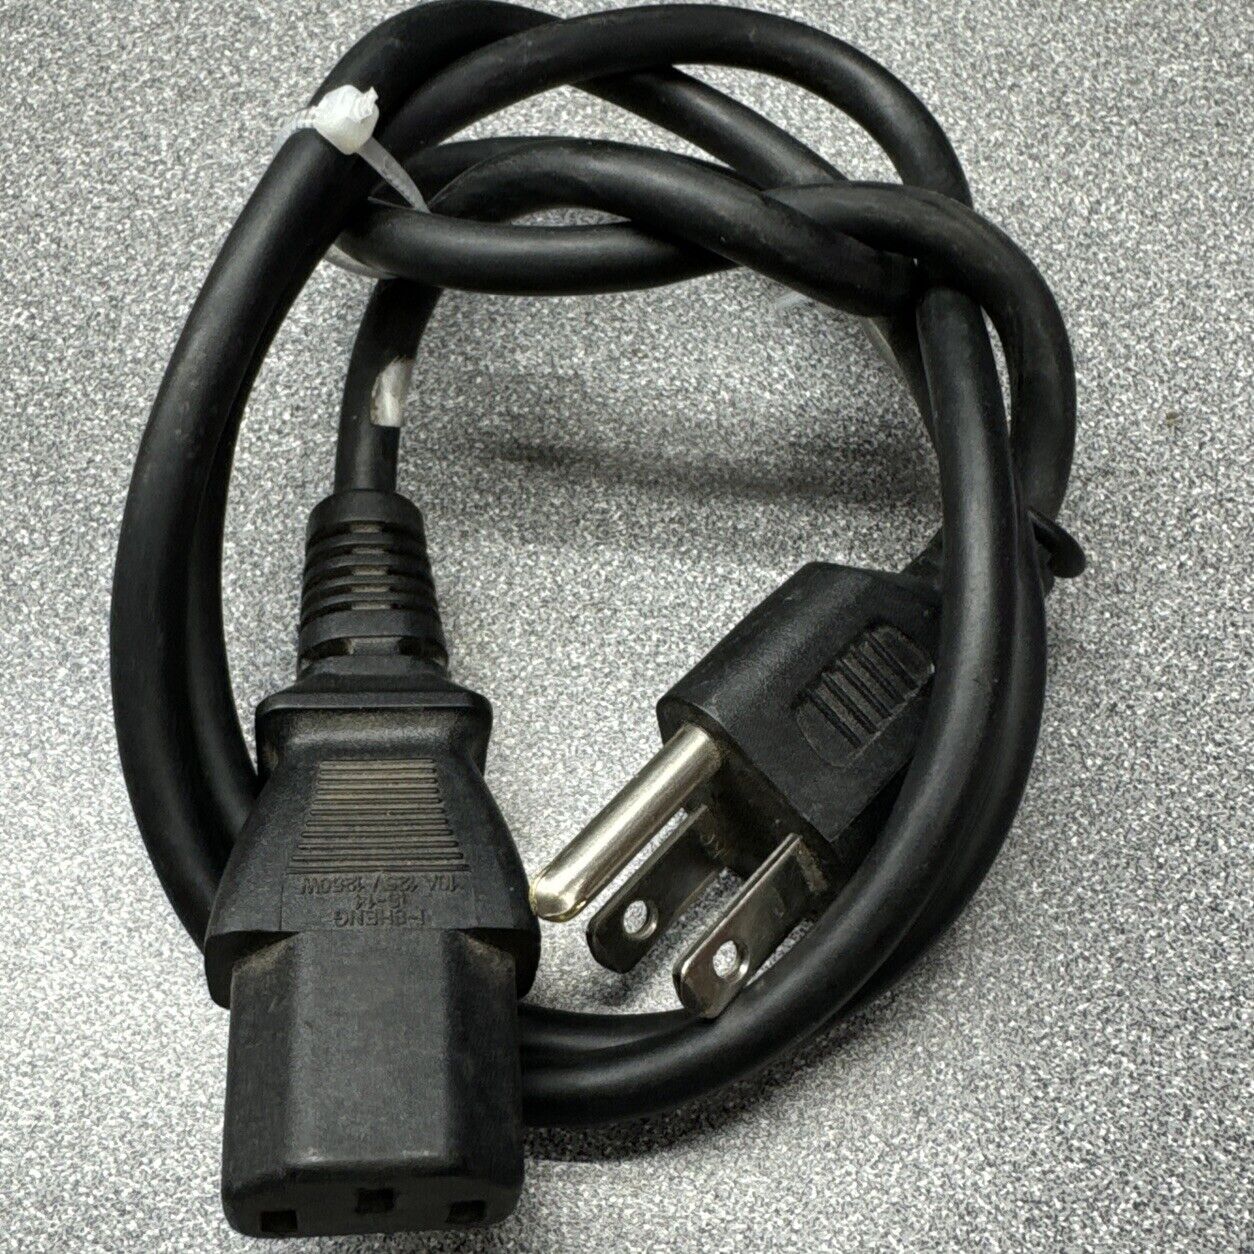 “FOR PARTS” i-sheng] 10A 125v 1250w Power Cord Cable] [Black, 3 Ft]  Power Part